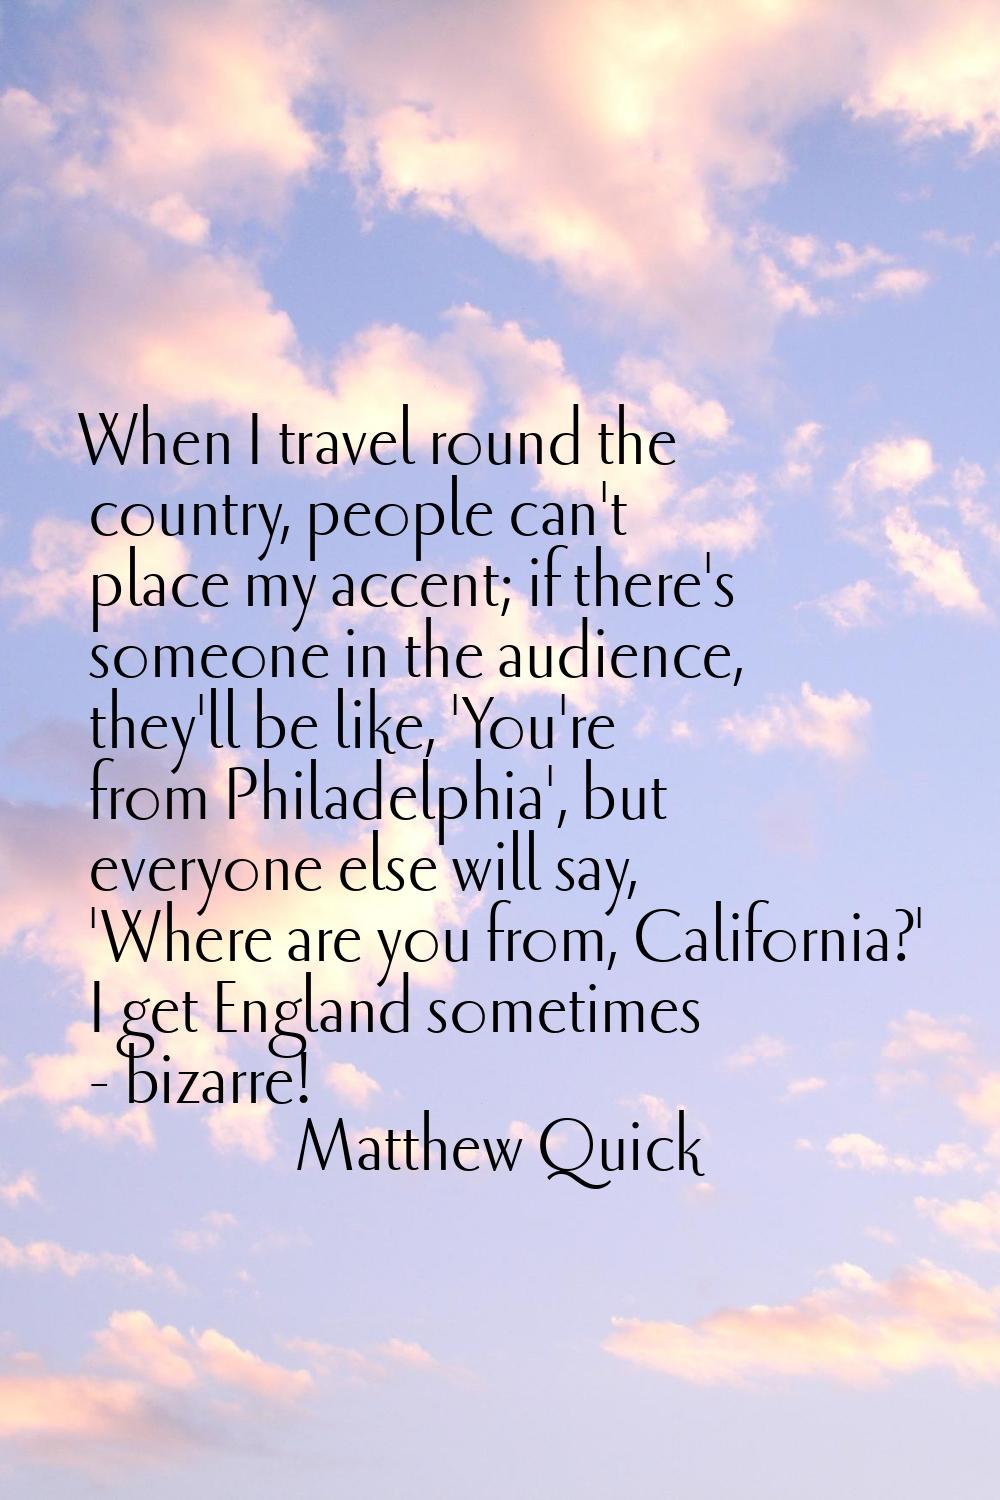 When I travel round the country, people can't place my accent; if there's someone in the audience, 